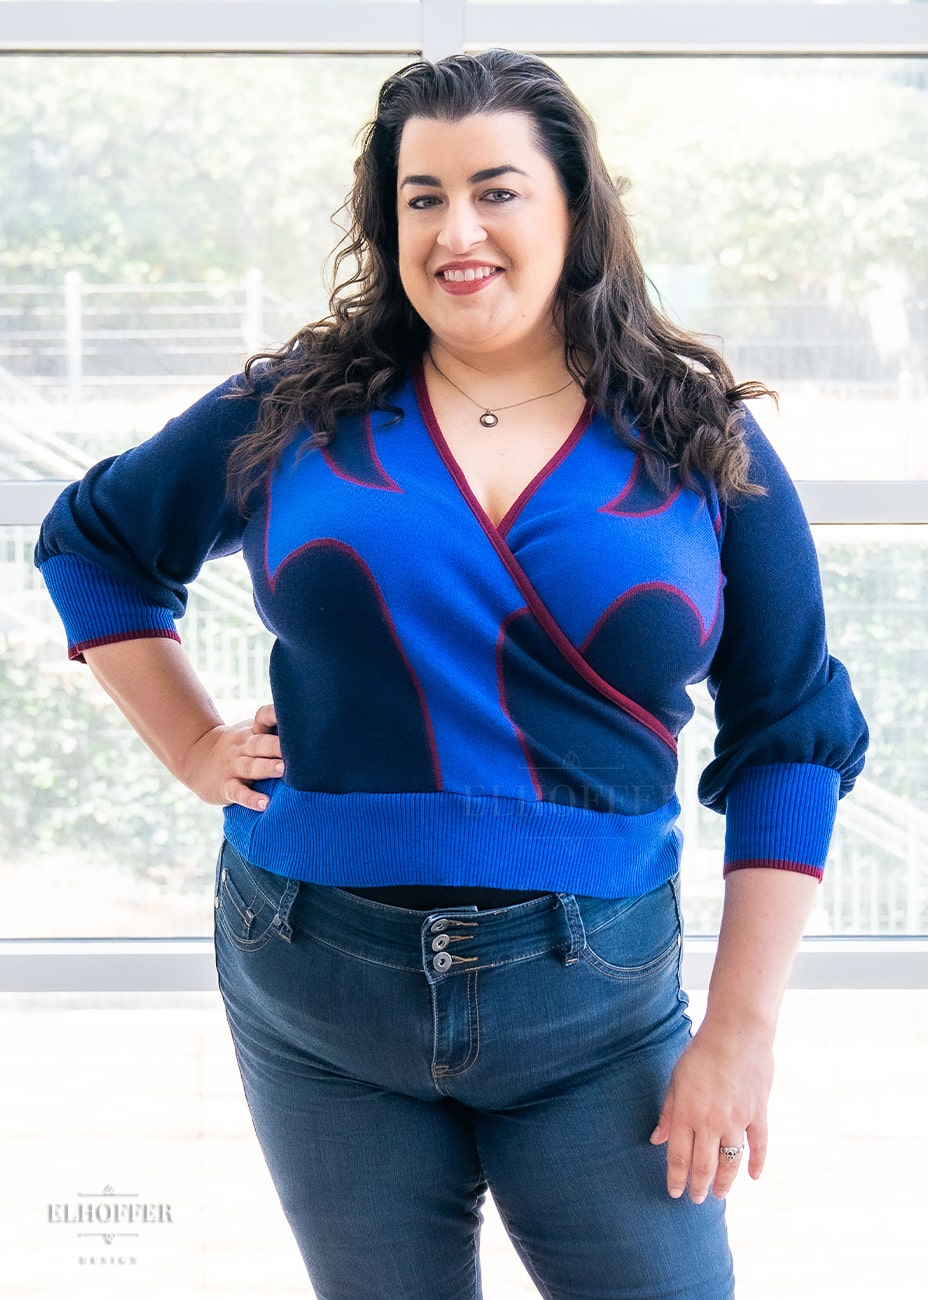 Heather, a size XL medium fair skinned model with long curly brown hair, wearing a crossover knit crop top. The base is a dark blue, details are bright blue with a red outline and form almost a t shape in the middle of the crop. The cuffs and bottom are the same bright blue of the detail and the crossover is piped in the same red.